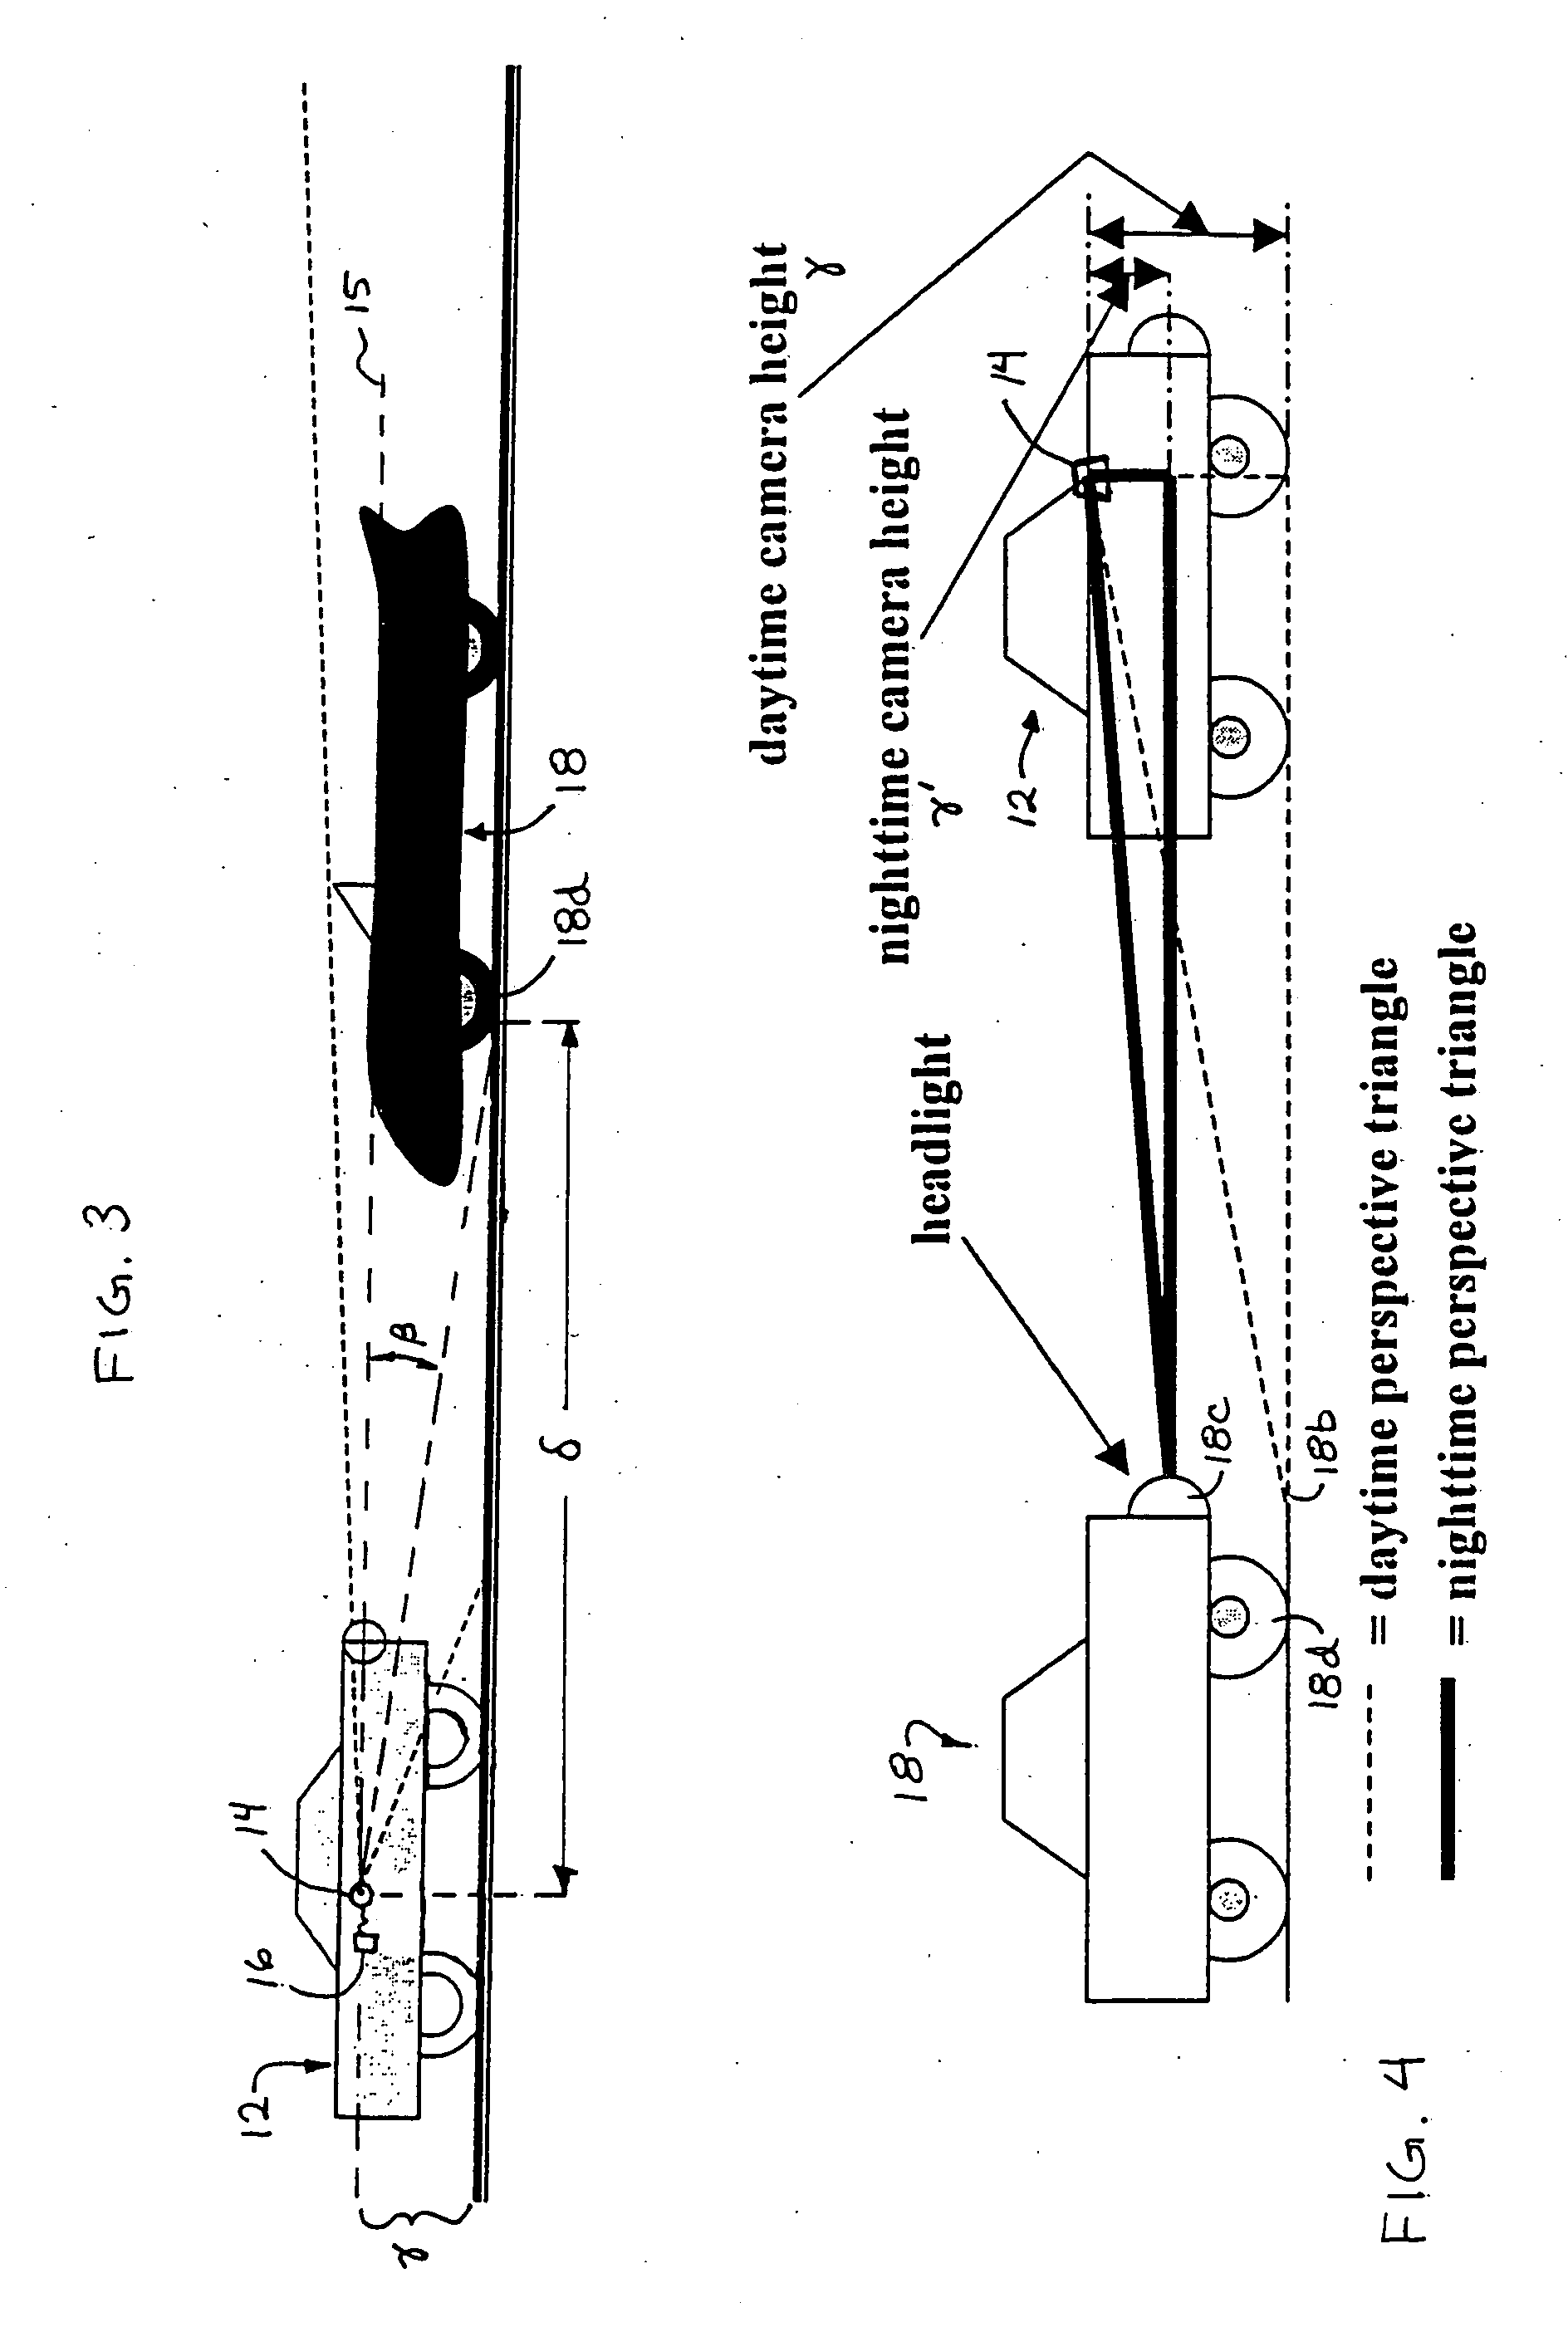 Object detection system for vehicle